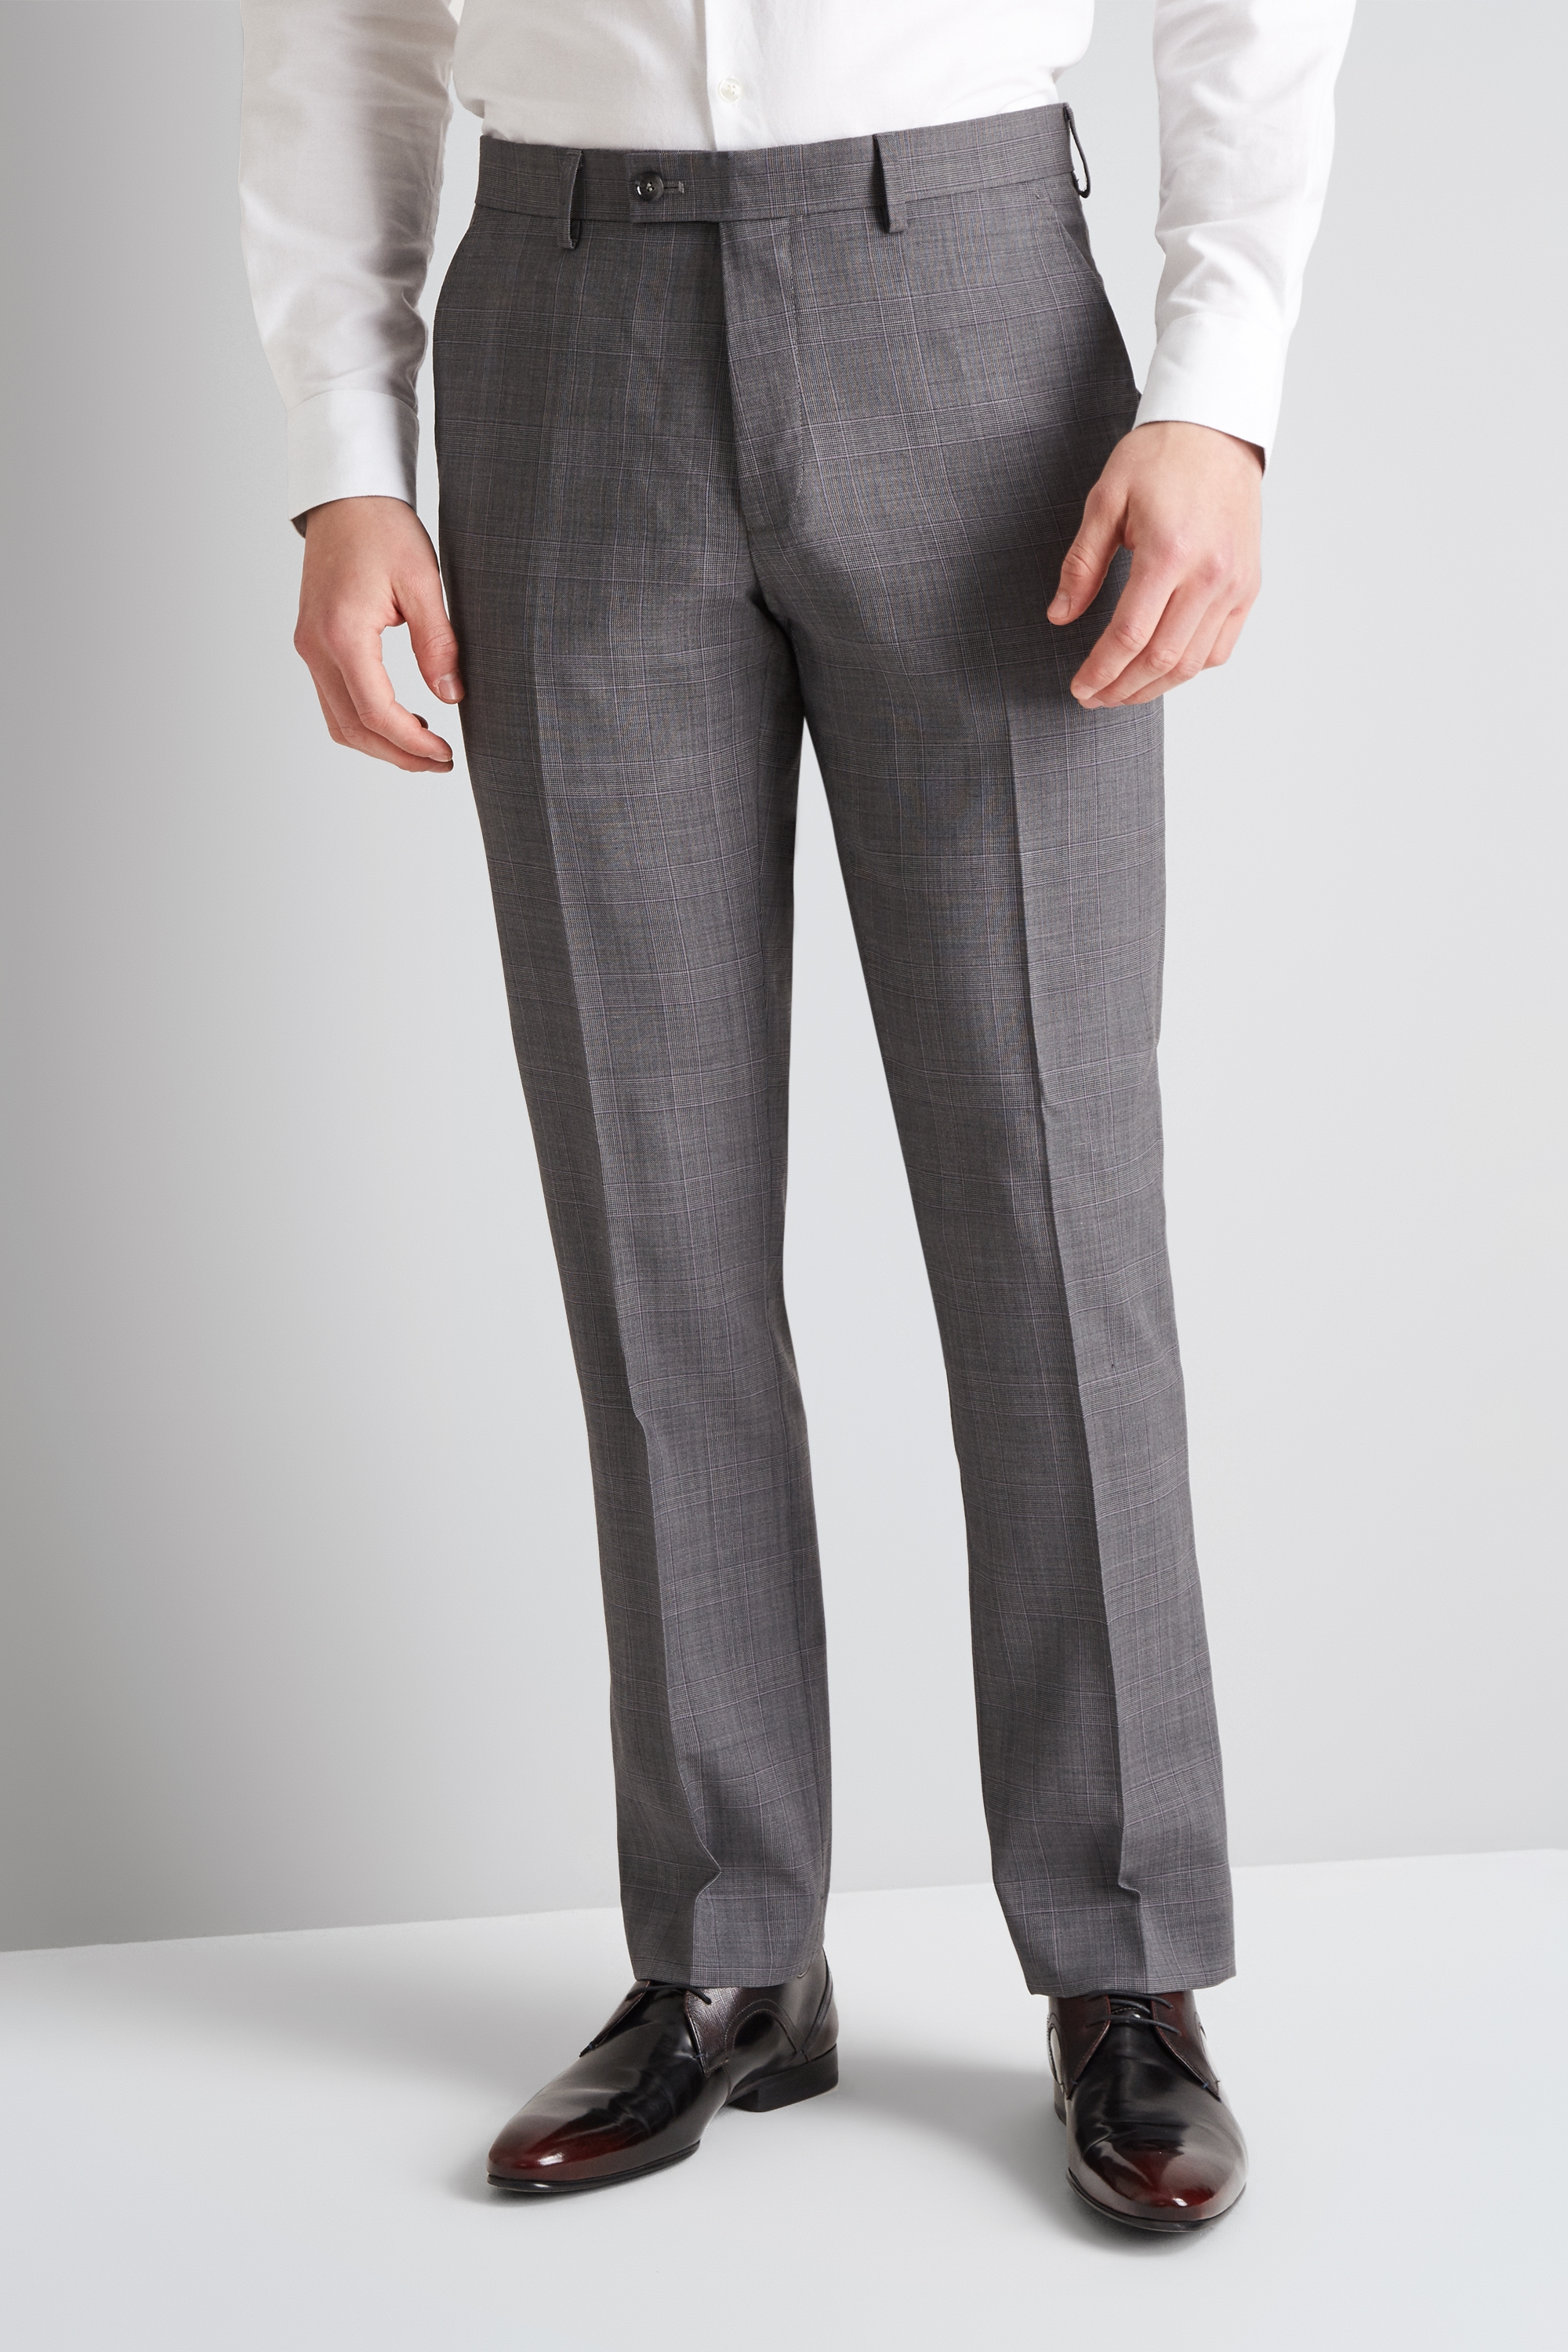 Ted Baker Tailored Fit Grey with Lilac Check Trousers | Buy Online at Moss